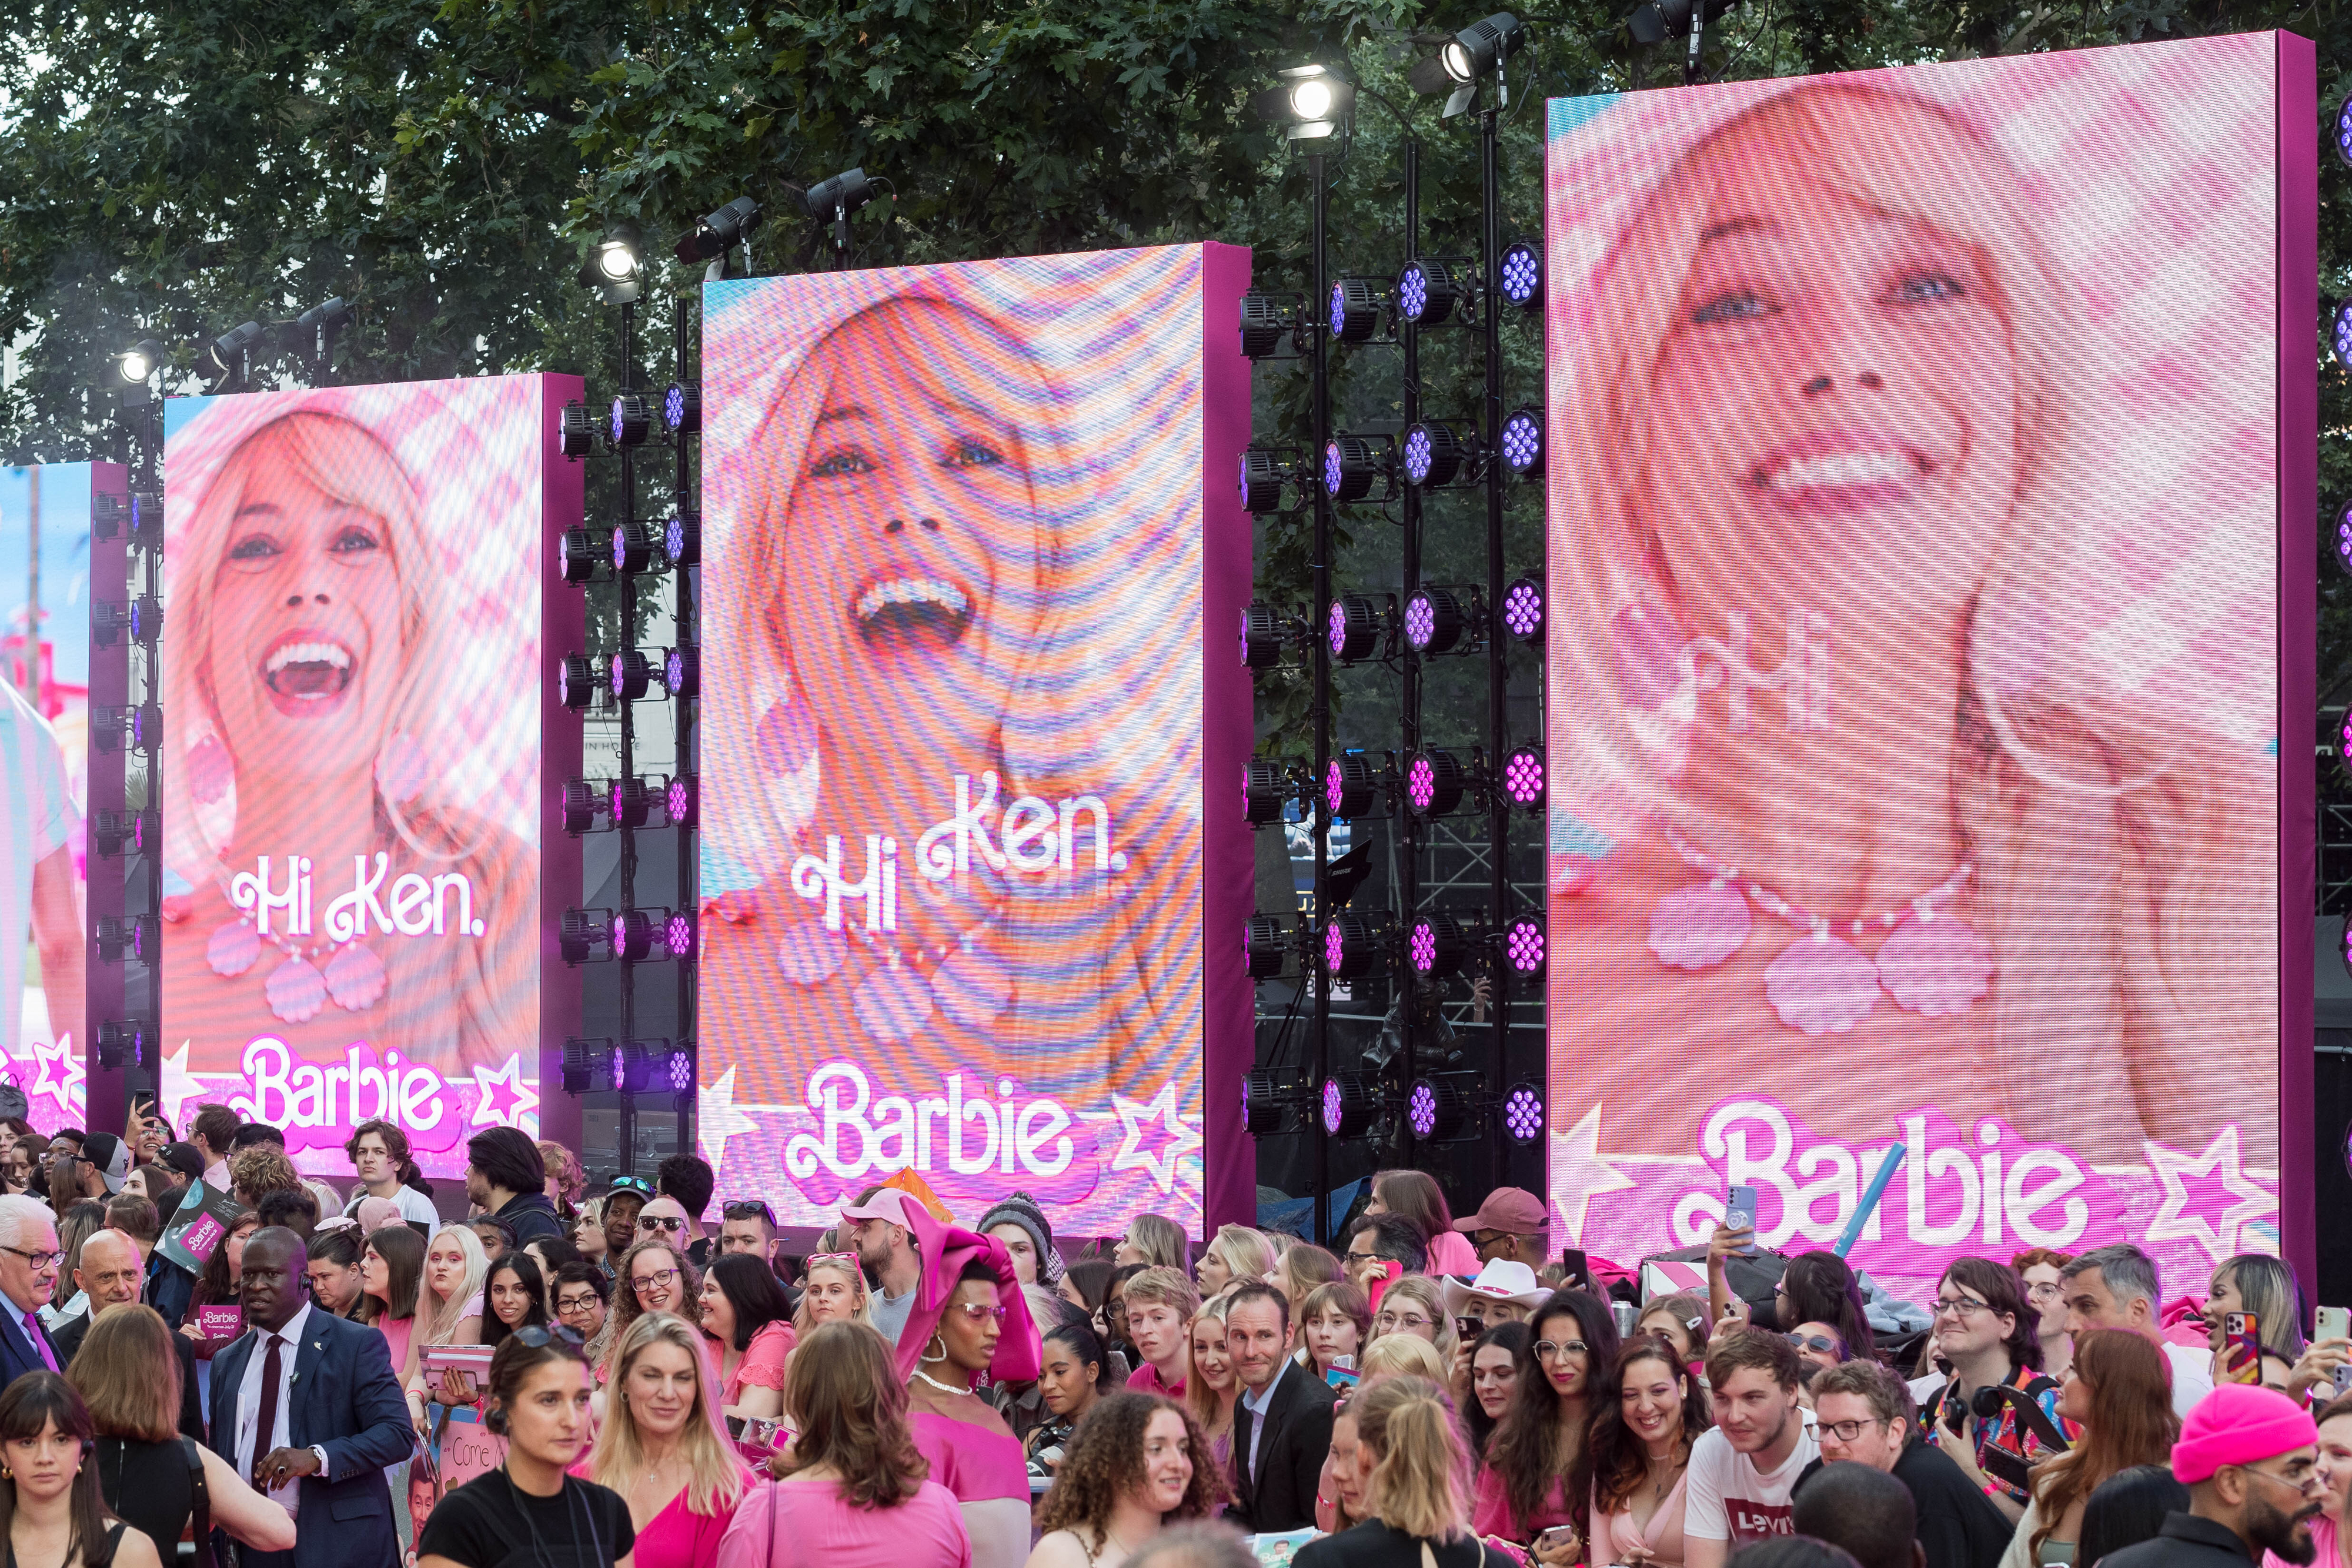 A crowd at a Barbie event